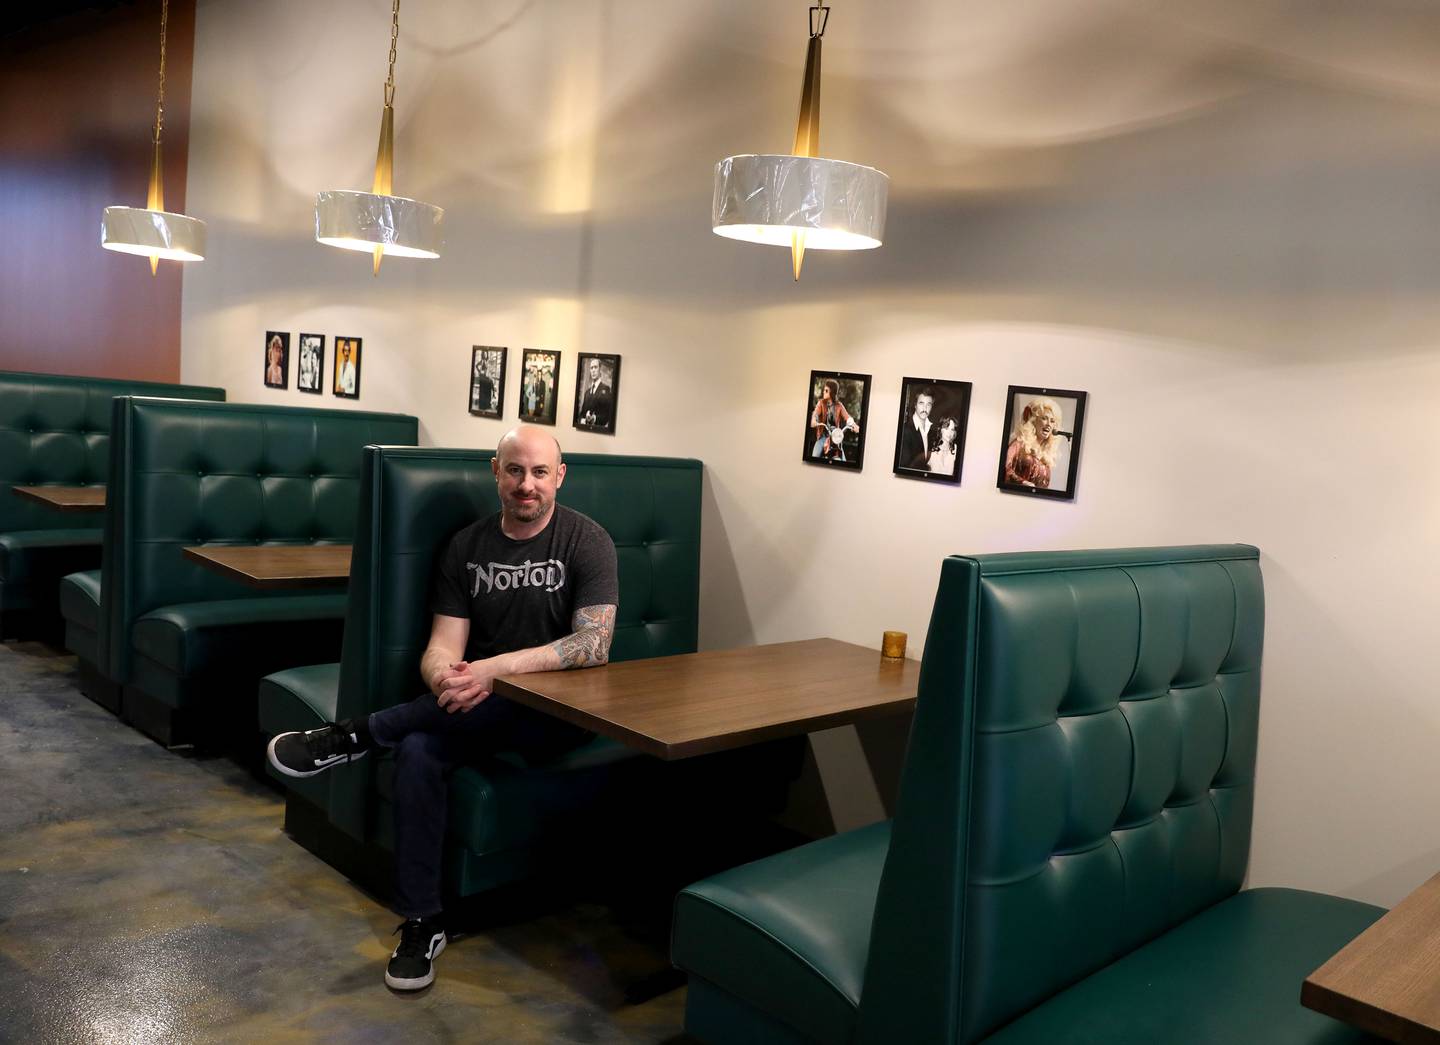 Co-owner Rick Muermann and his partners plan to open The Lewis, a 70s-themed cocktail lounge, Feb. 3 at 106 E. Main St. in downtown St. Charles. The owners of The Lewis also own Bogart's bar at 219 W. Main St. in St. Charles.